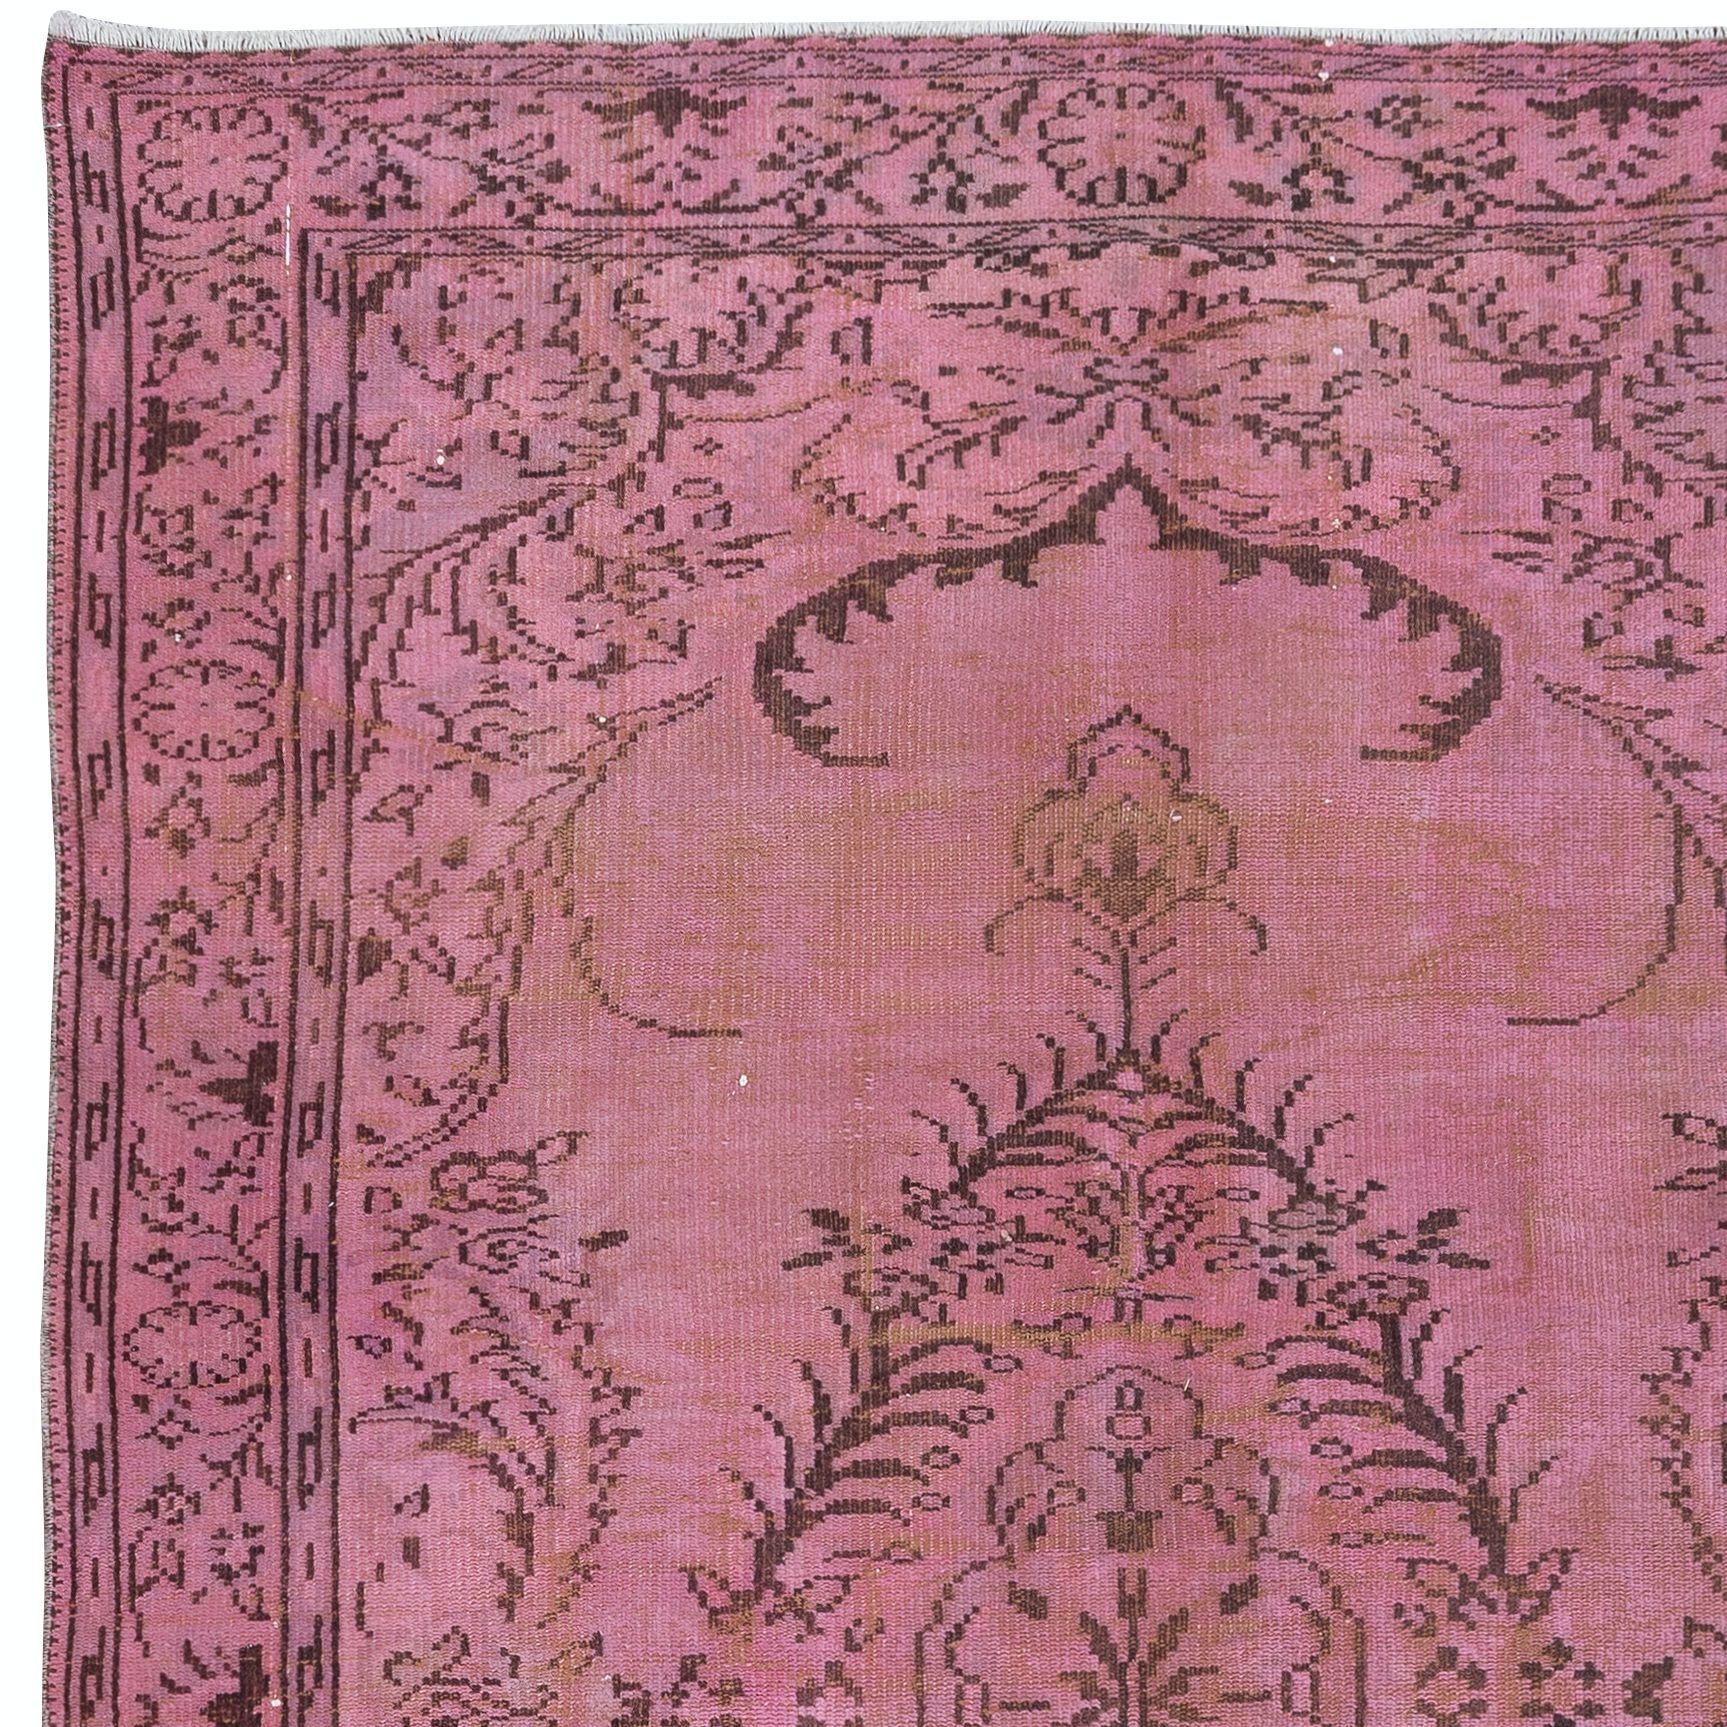 Hand-Woven 6x9.3 Ft Pink Over-Dyed Handmade Turkish Area Rug for Modern Home & Office Decor For Sale